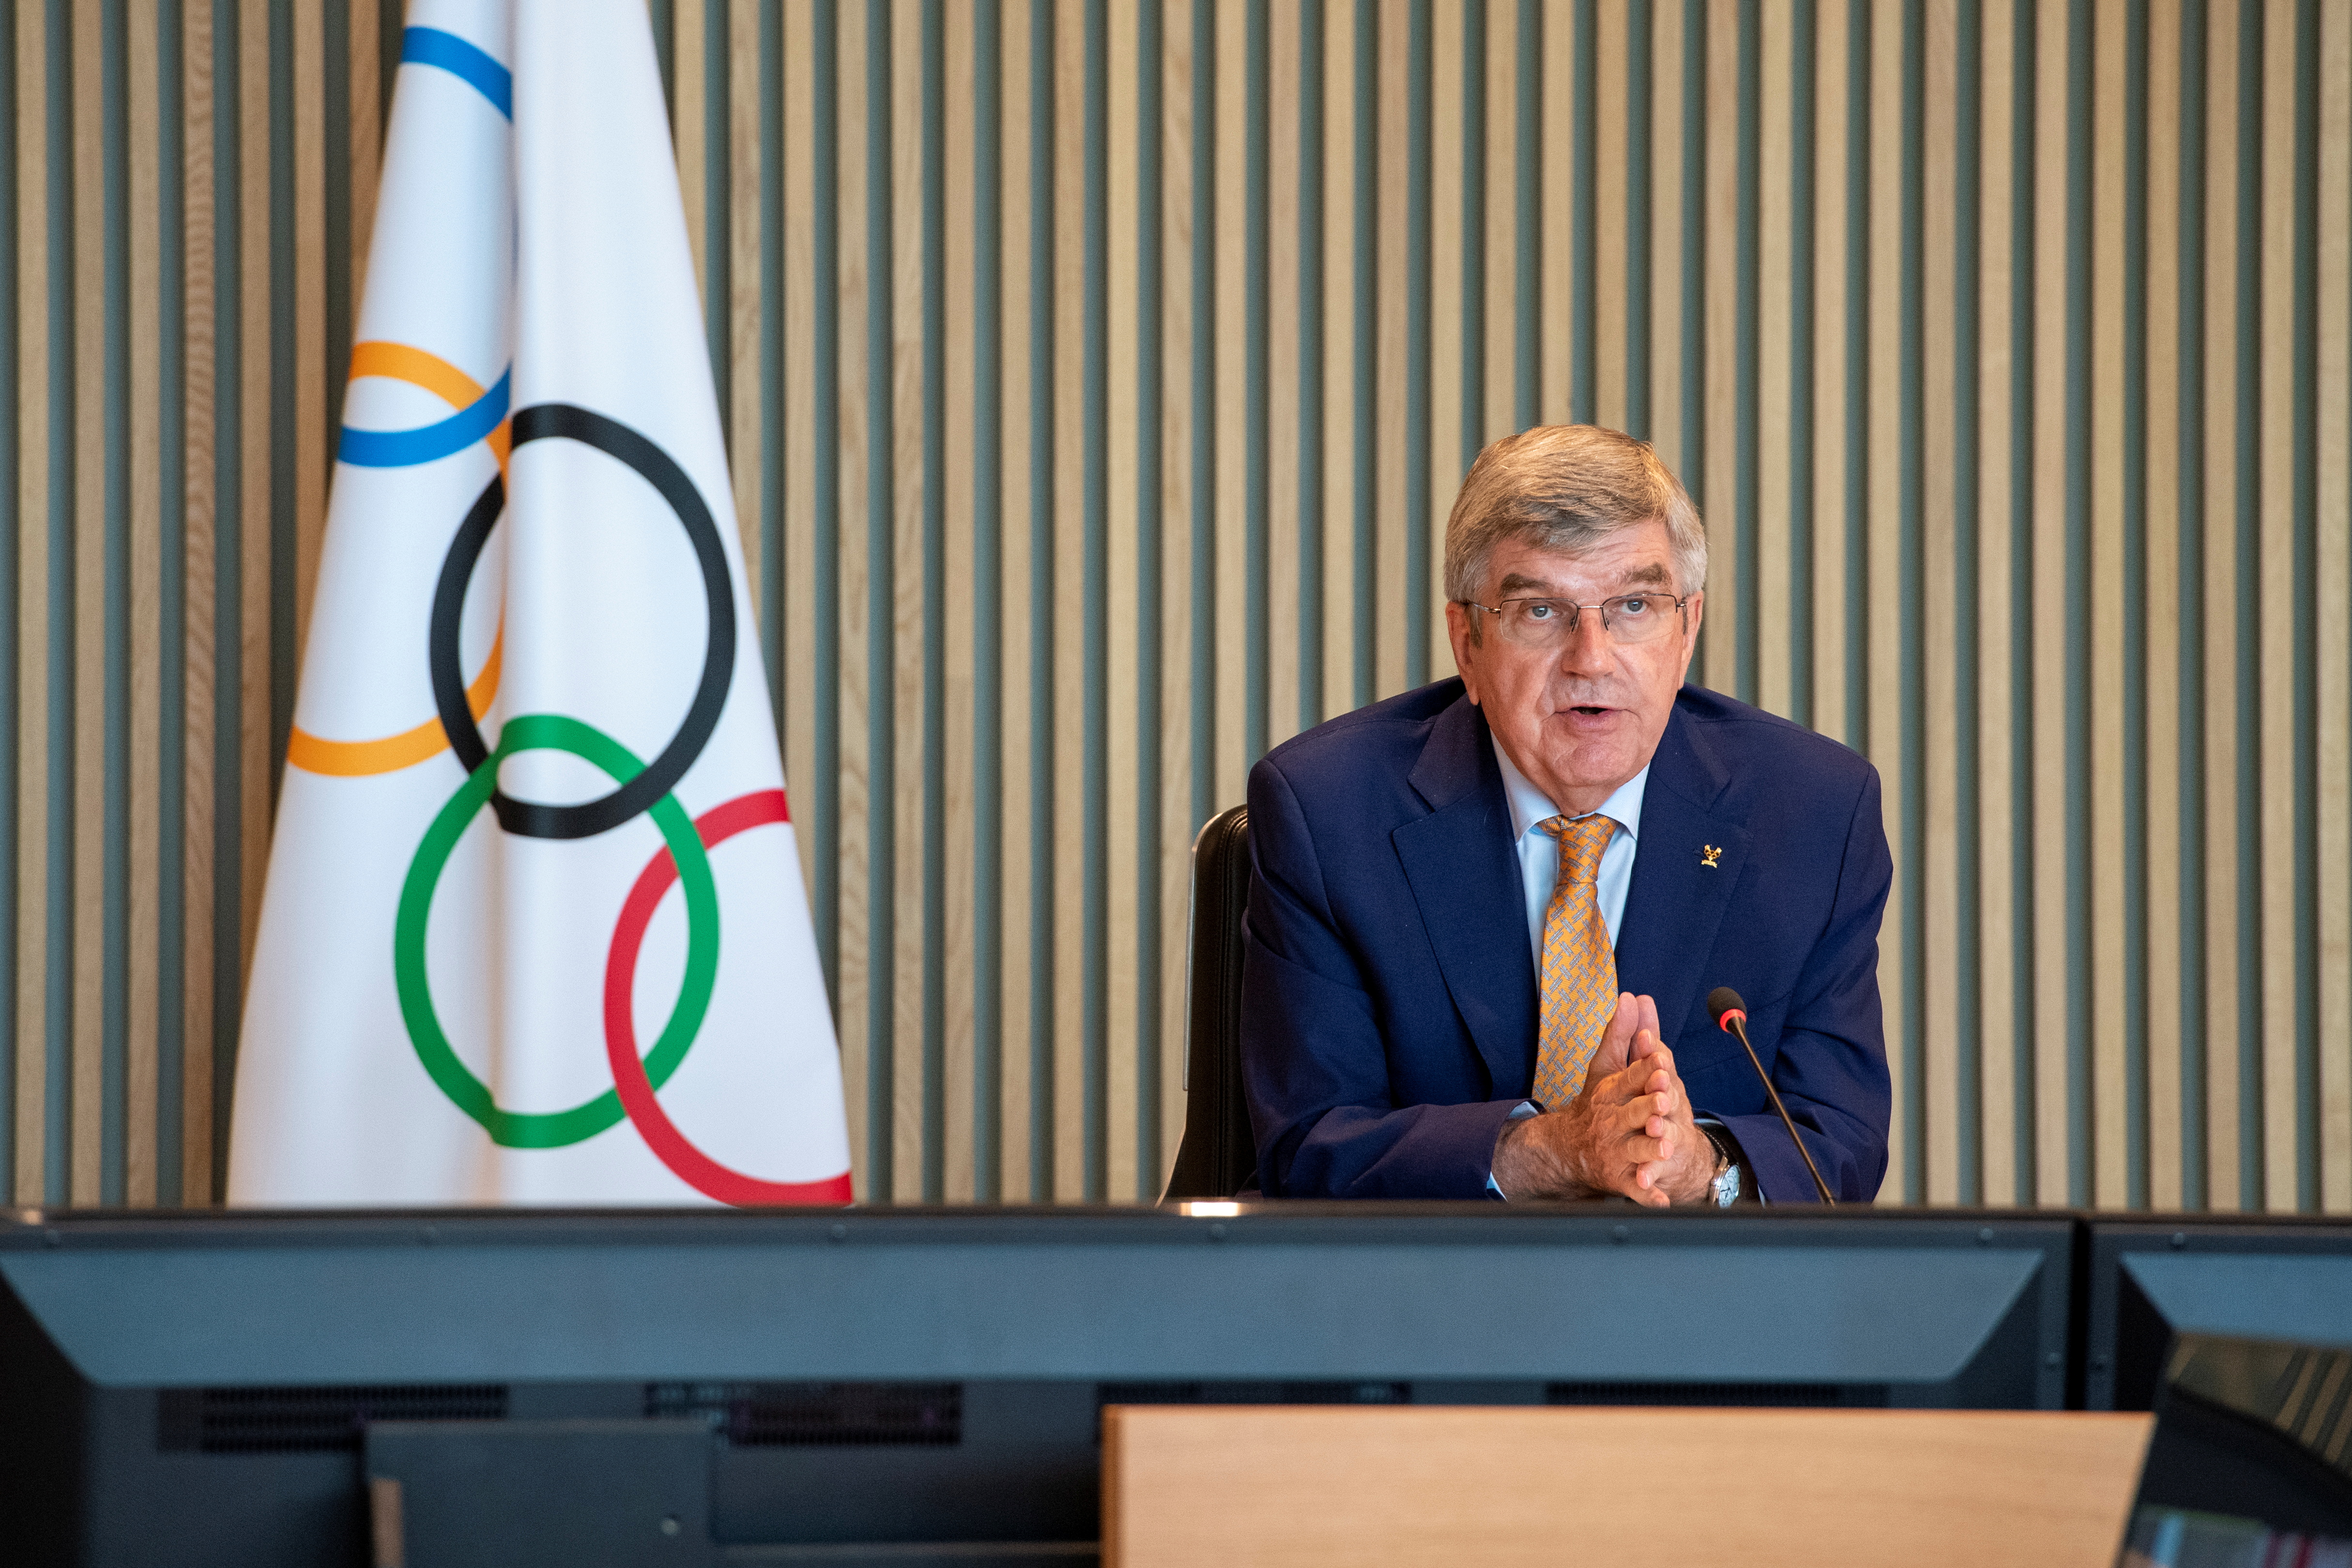 IOC President Thomas Bach attends Executive Board virtual meeting in Lausanne